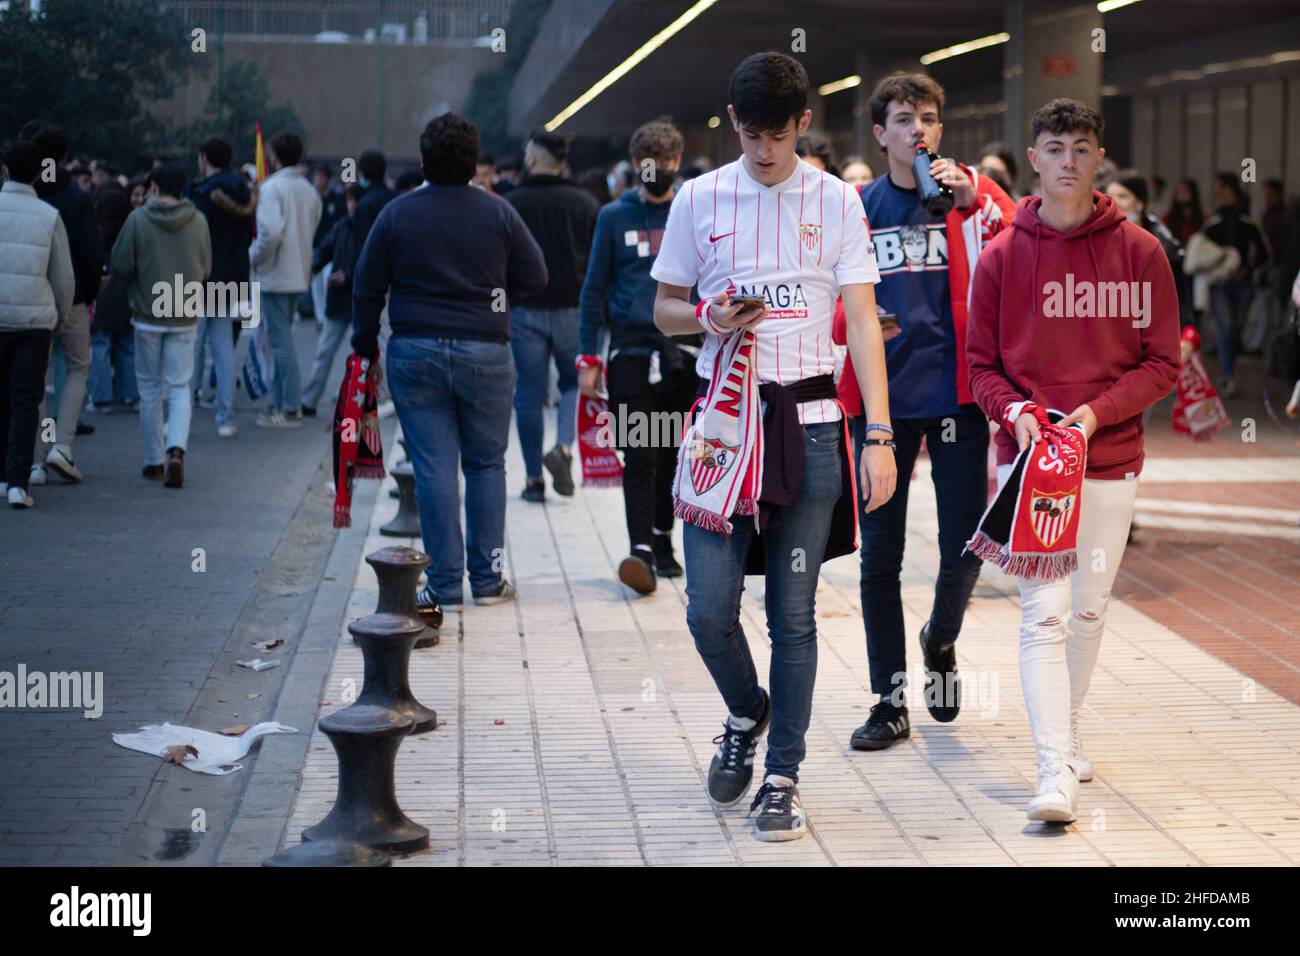 Seville, Spain. 15th Jan, 2022. Football supporters of Sevilla FC wearing fan gear seen outside the Sevilla FC hotel before the Copa del Rey football derby against Real Betis in Seville. (Photo credit: Mario Diaz Rasero Credit: Gonzales Photo/Alamy Live News Stock Photo